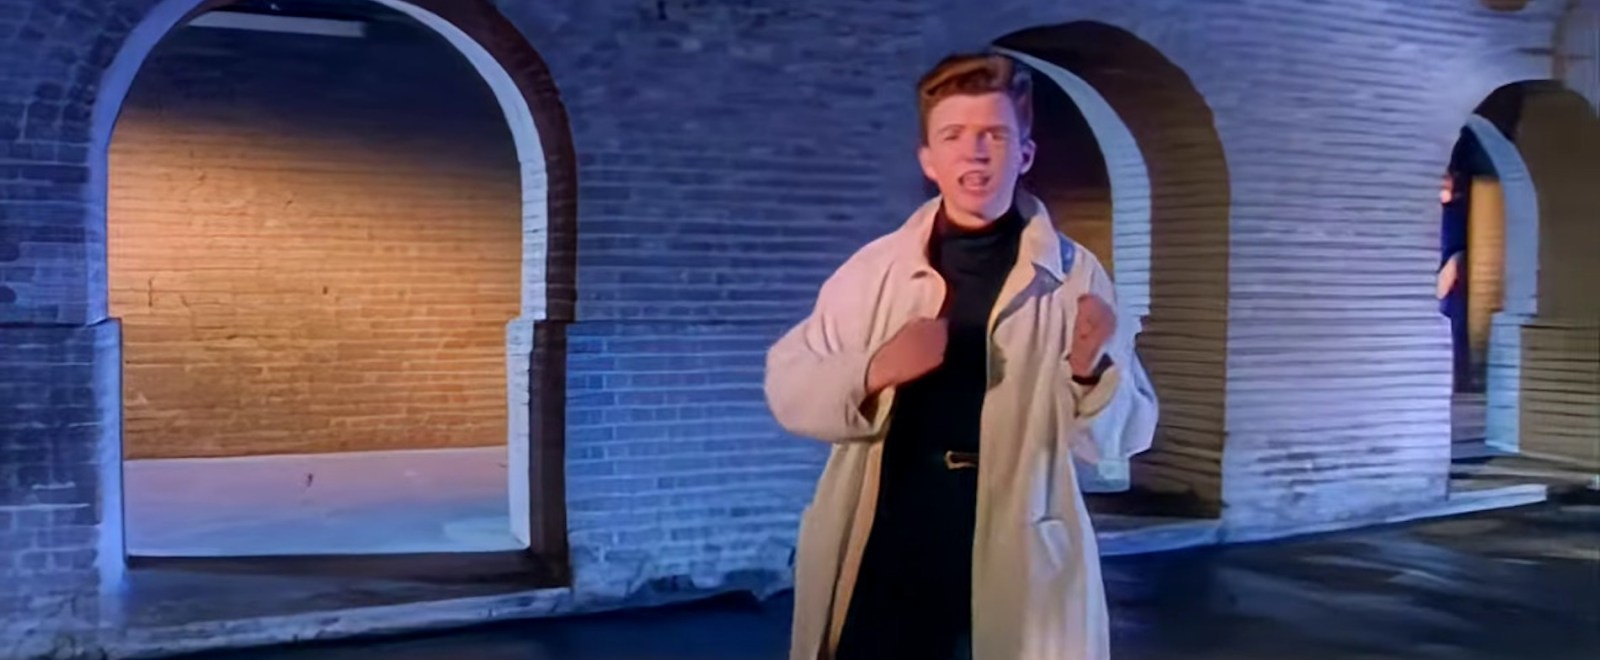 rick-astley-never-gonna-give-you-up-video-full.jpg